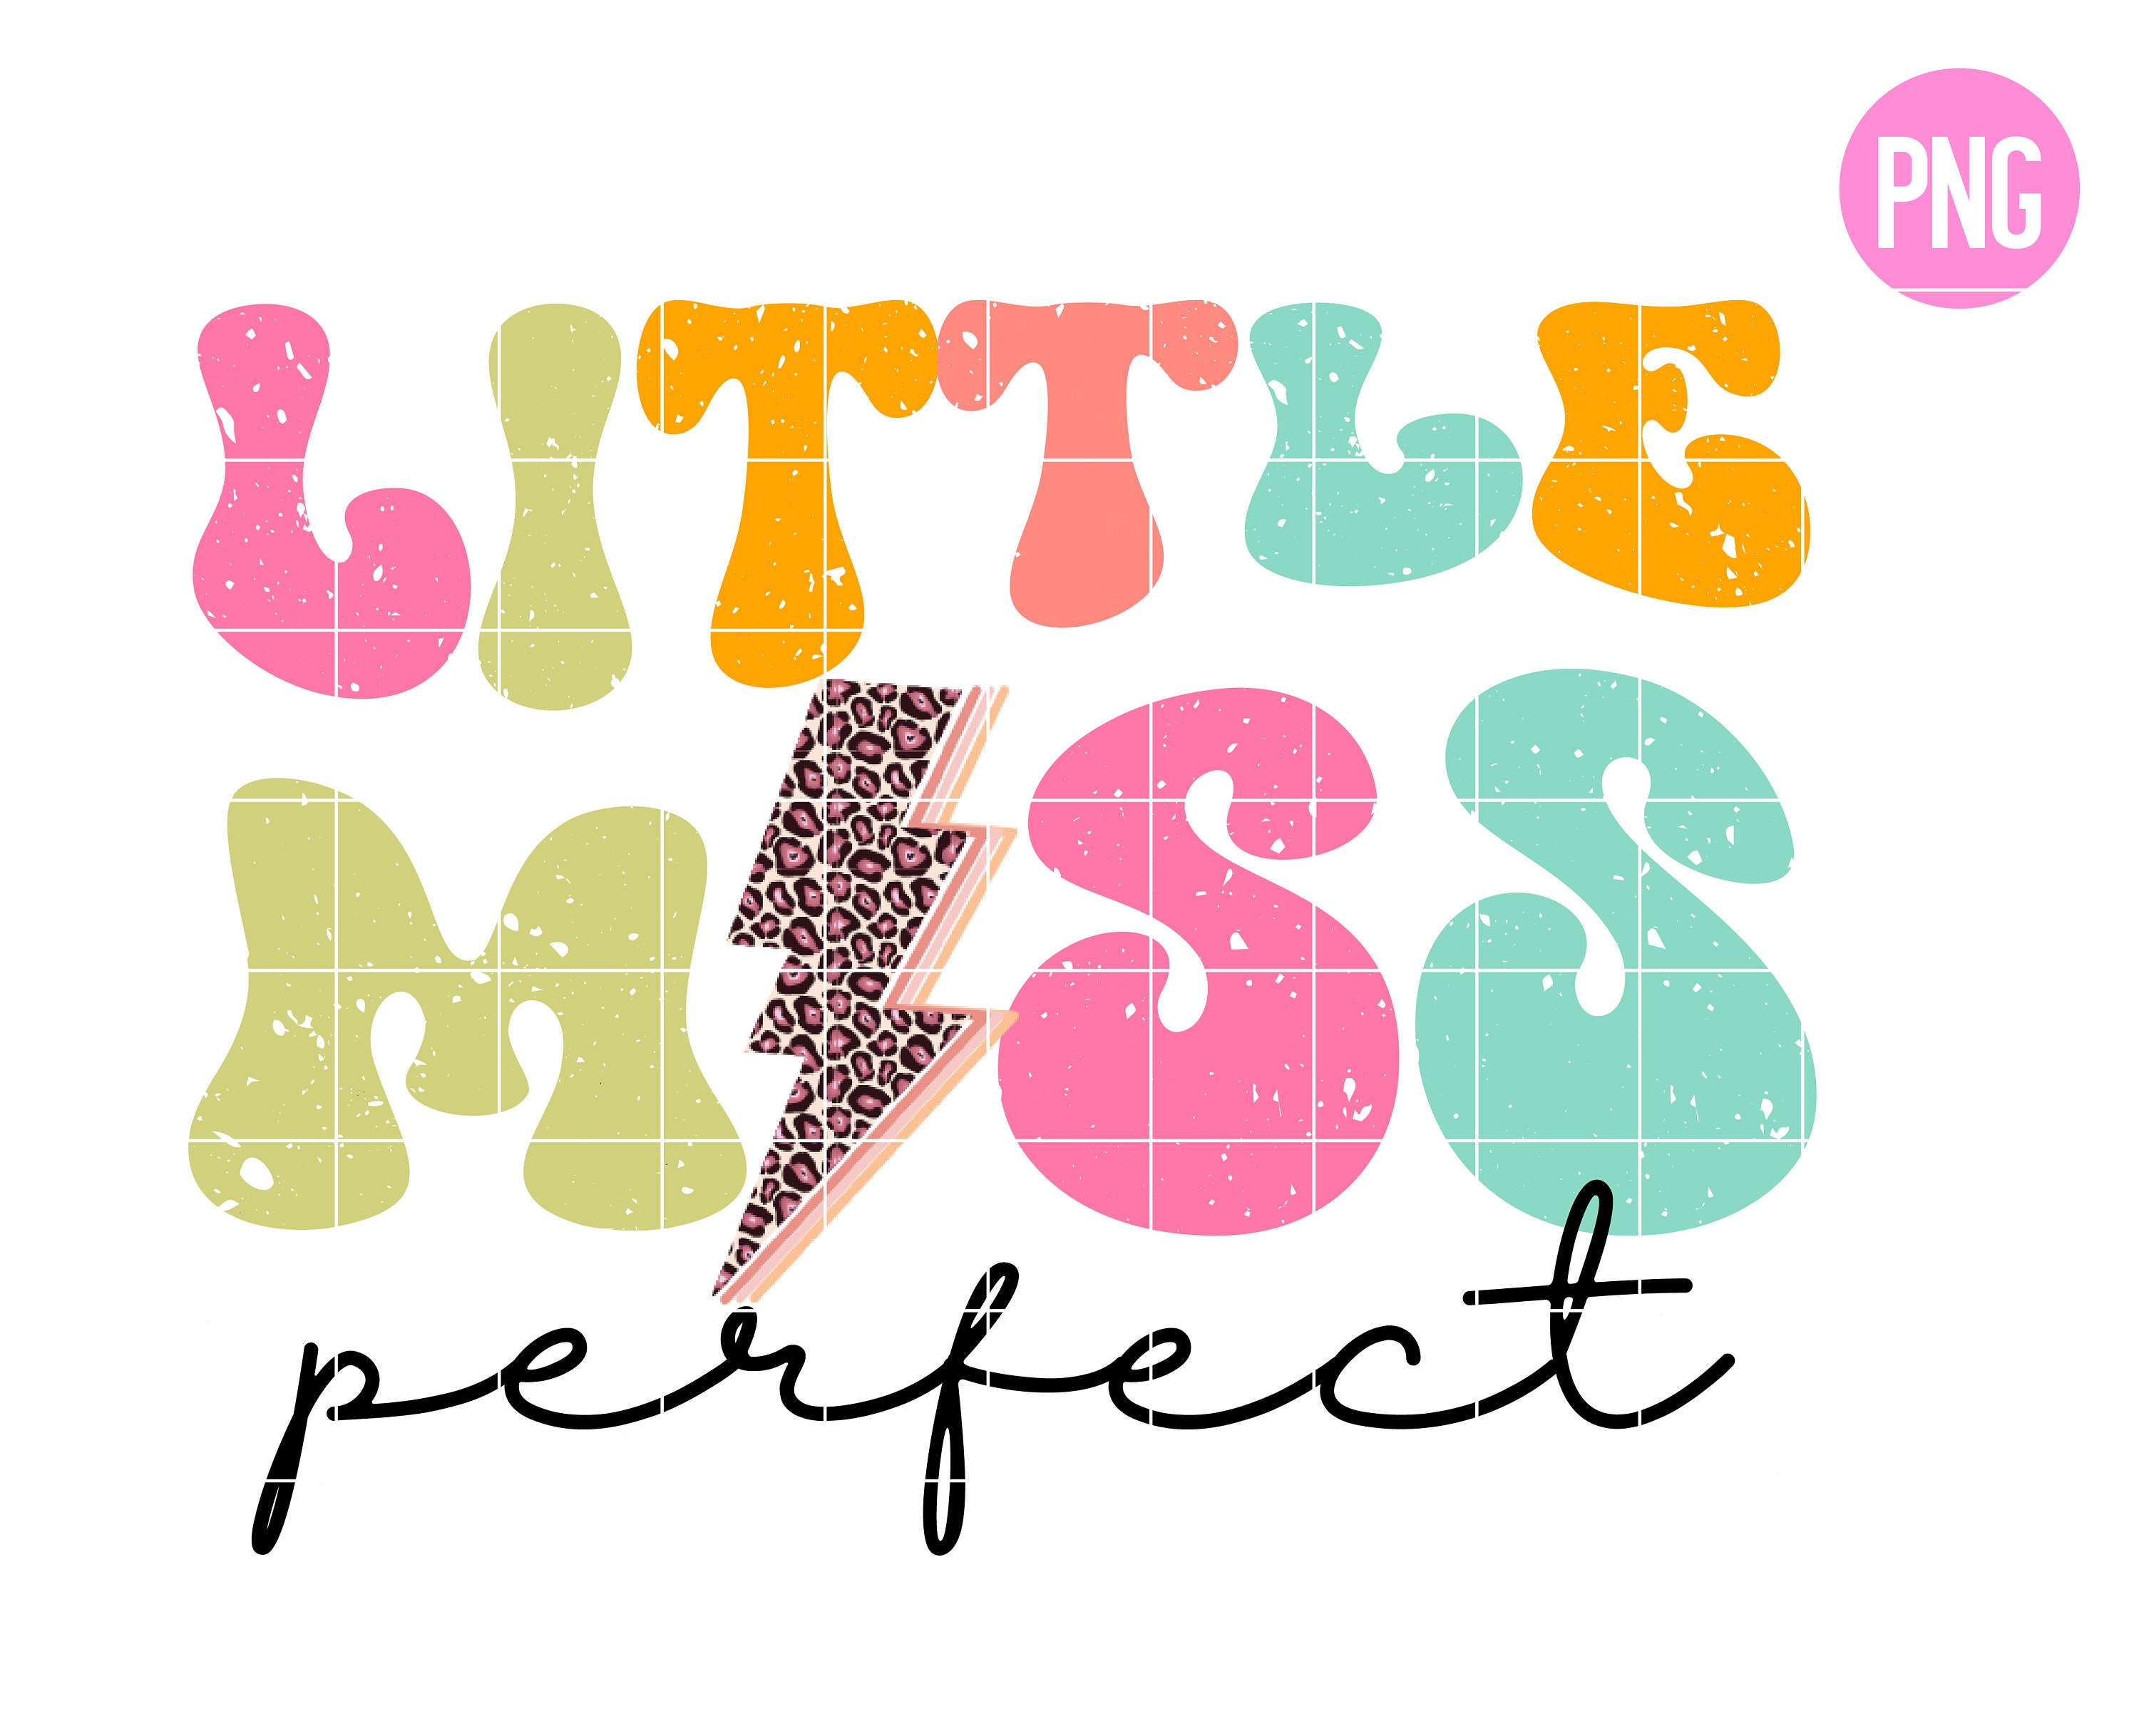 Little Miss Perfect Etsy